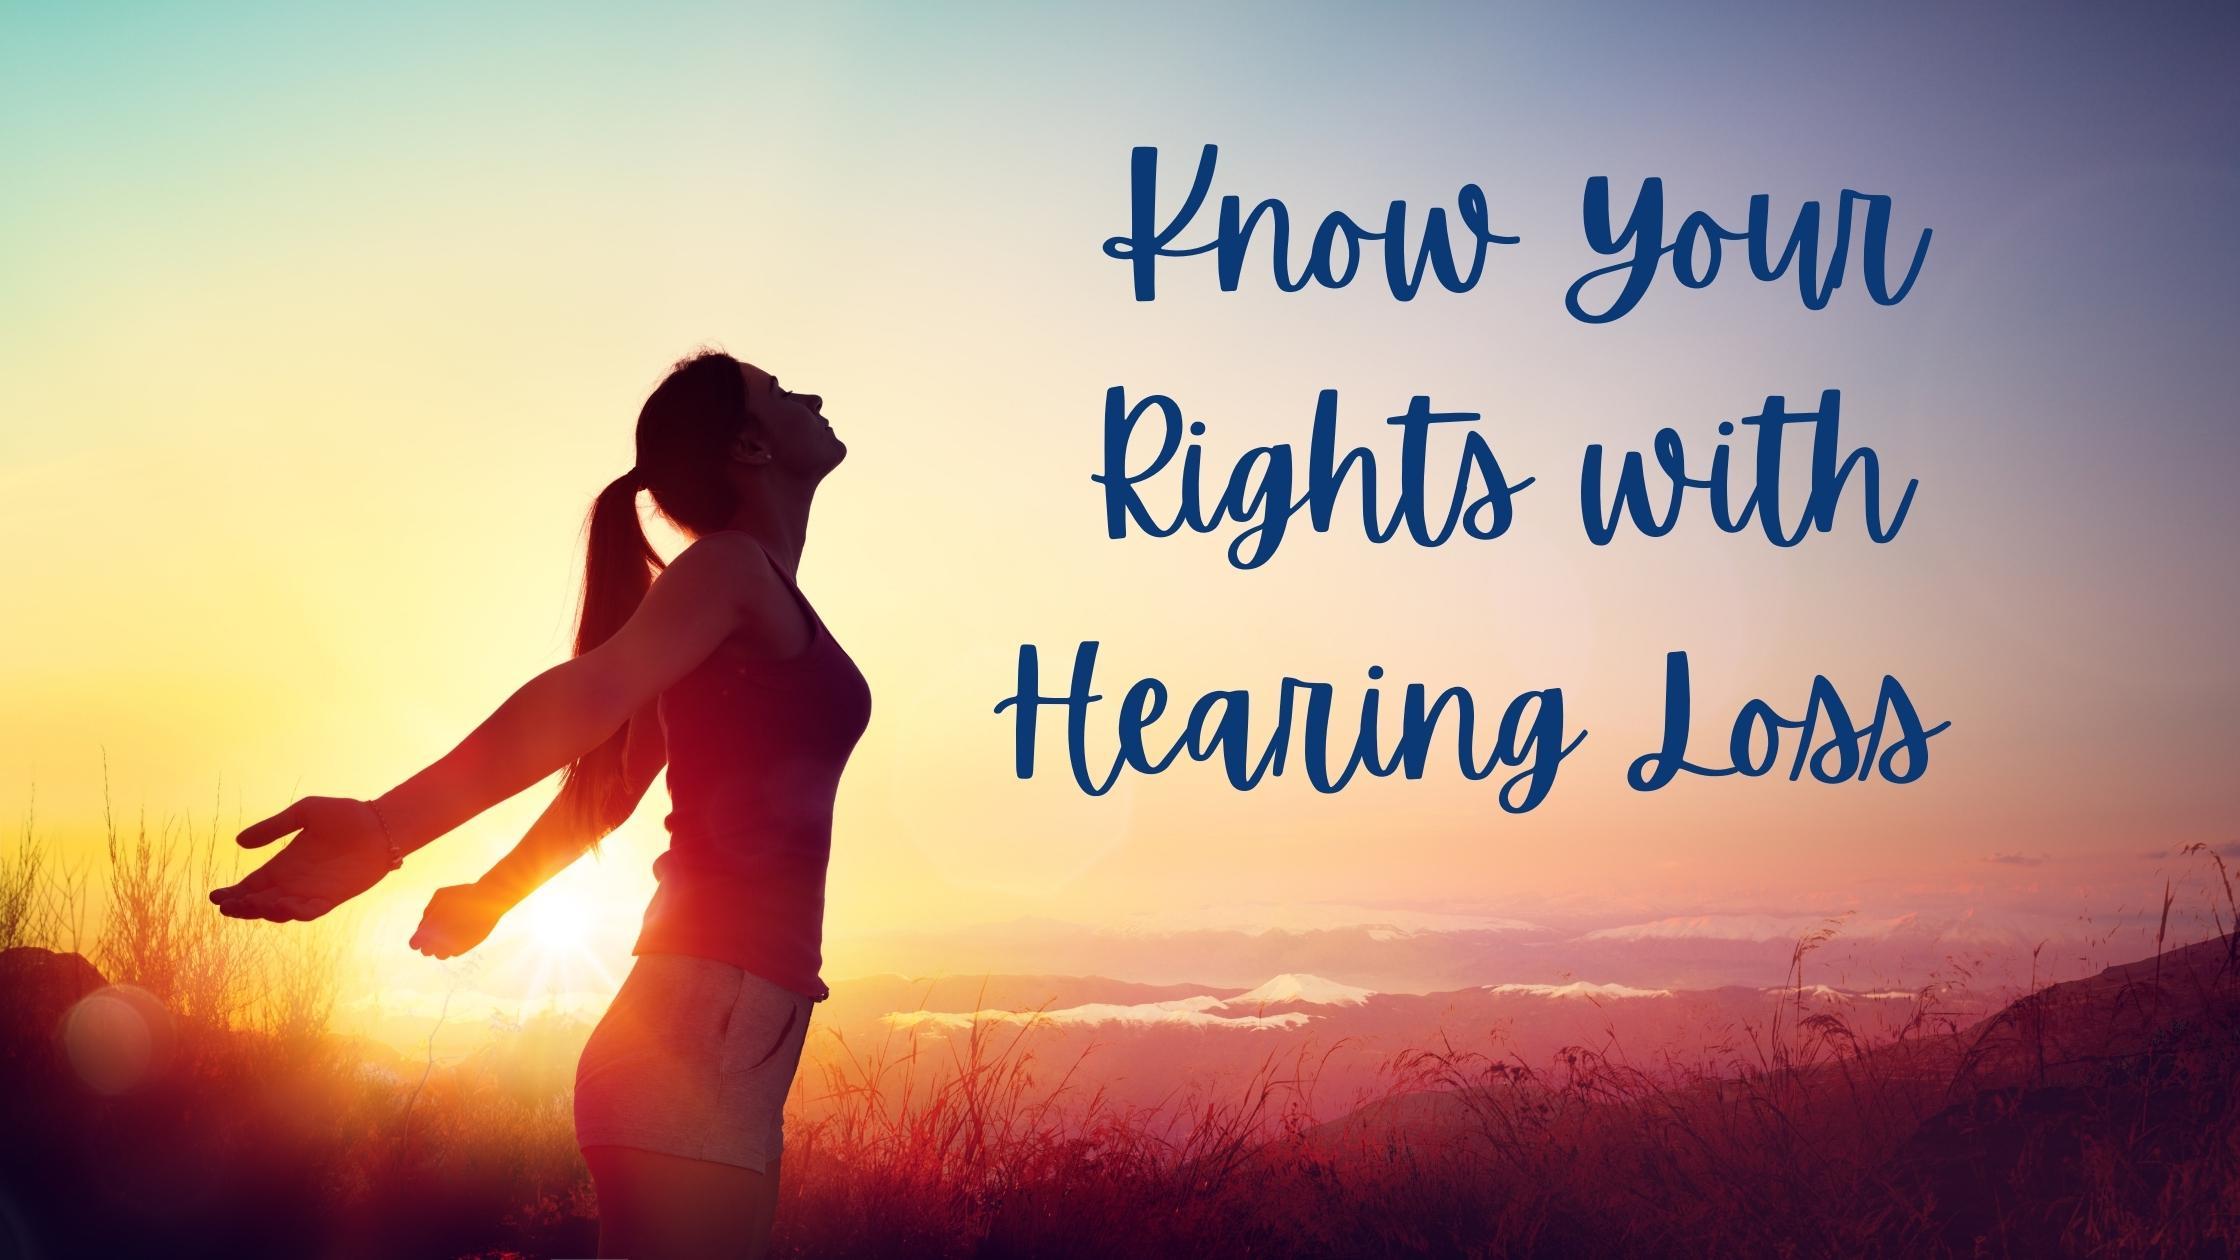 Featured image for “Know Your Rights with Hearing Loss”